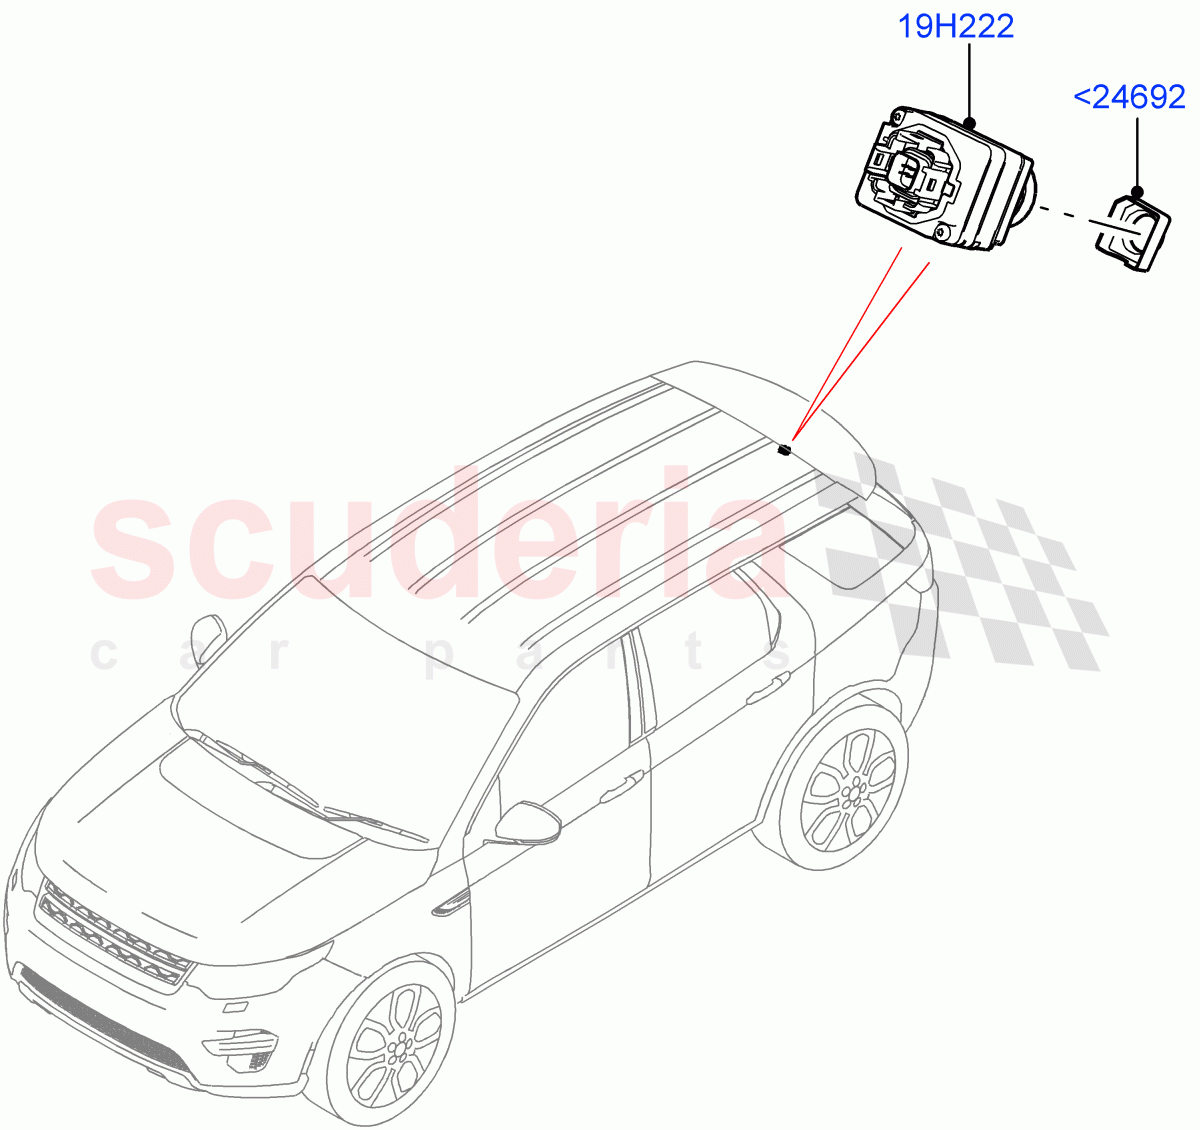 Camera Equipment(Halewood (UK),Rear View Camera-Fixed)((V)FROMMH000001) of Land Rover Land Rover Discovery Sport (2015+) [2.0 Turbo Petrol AJ200P]